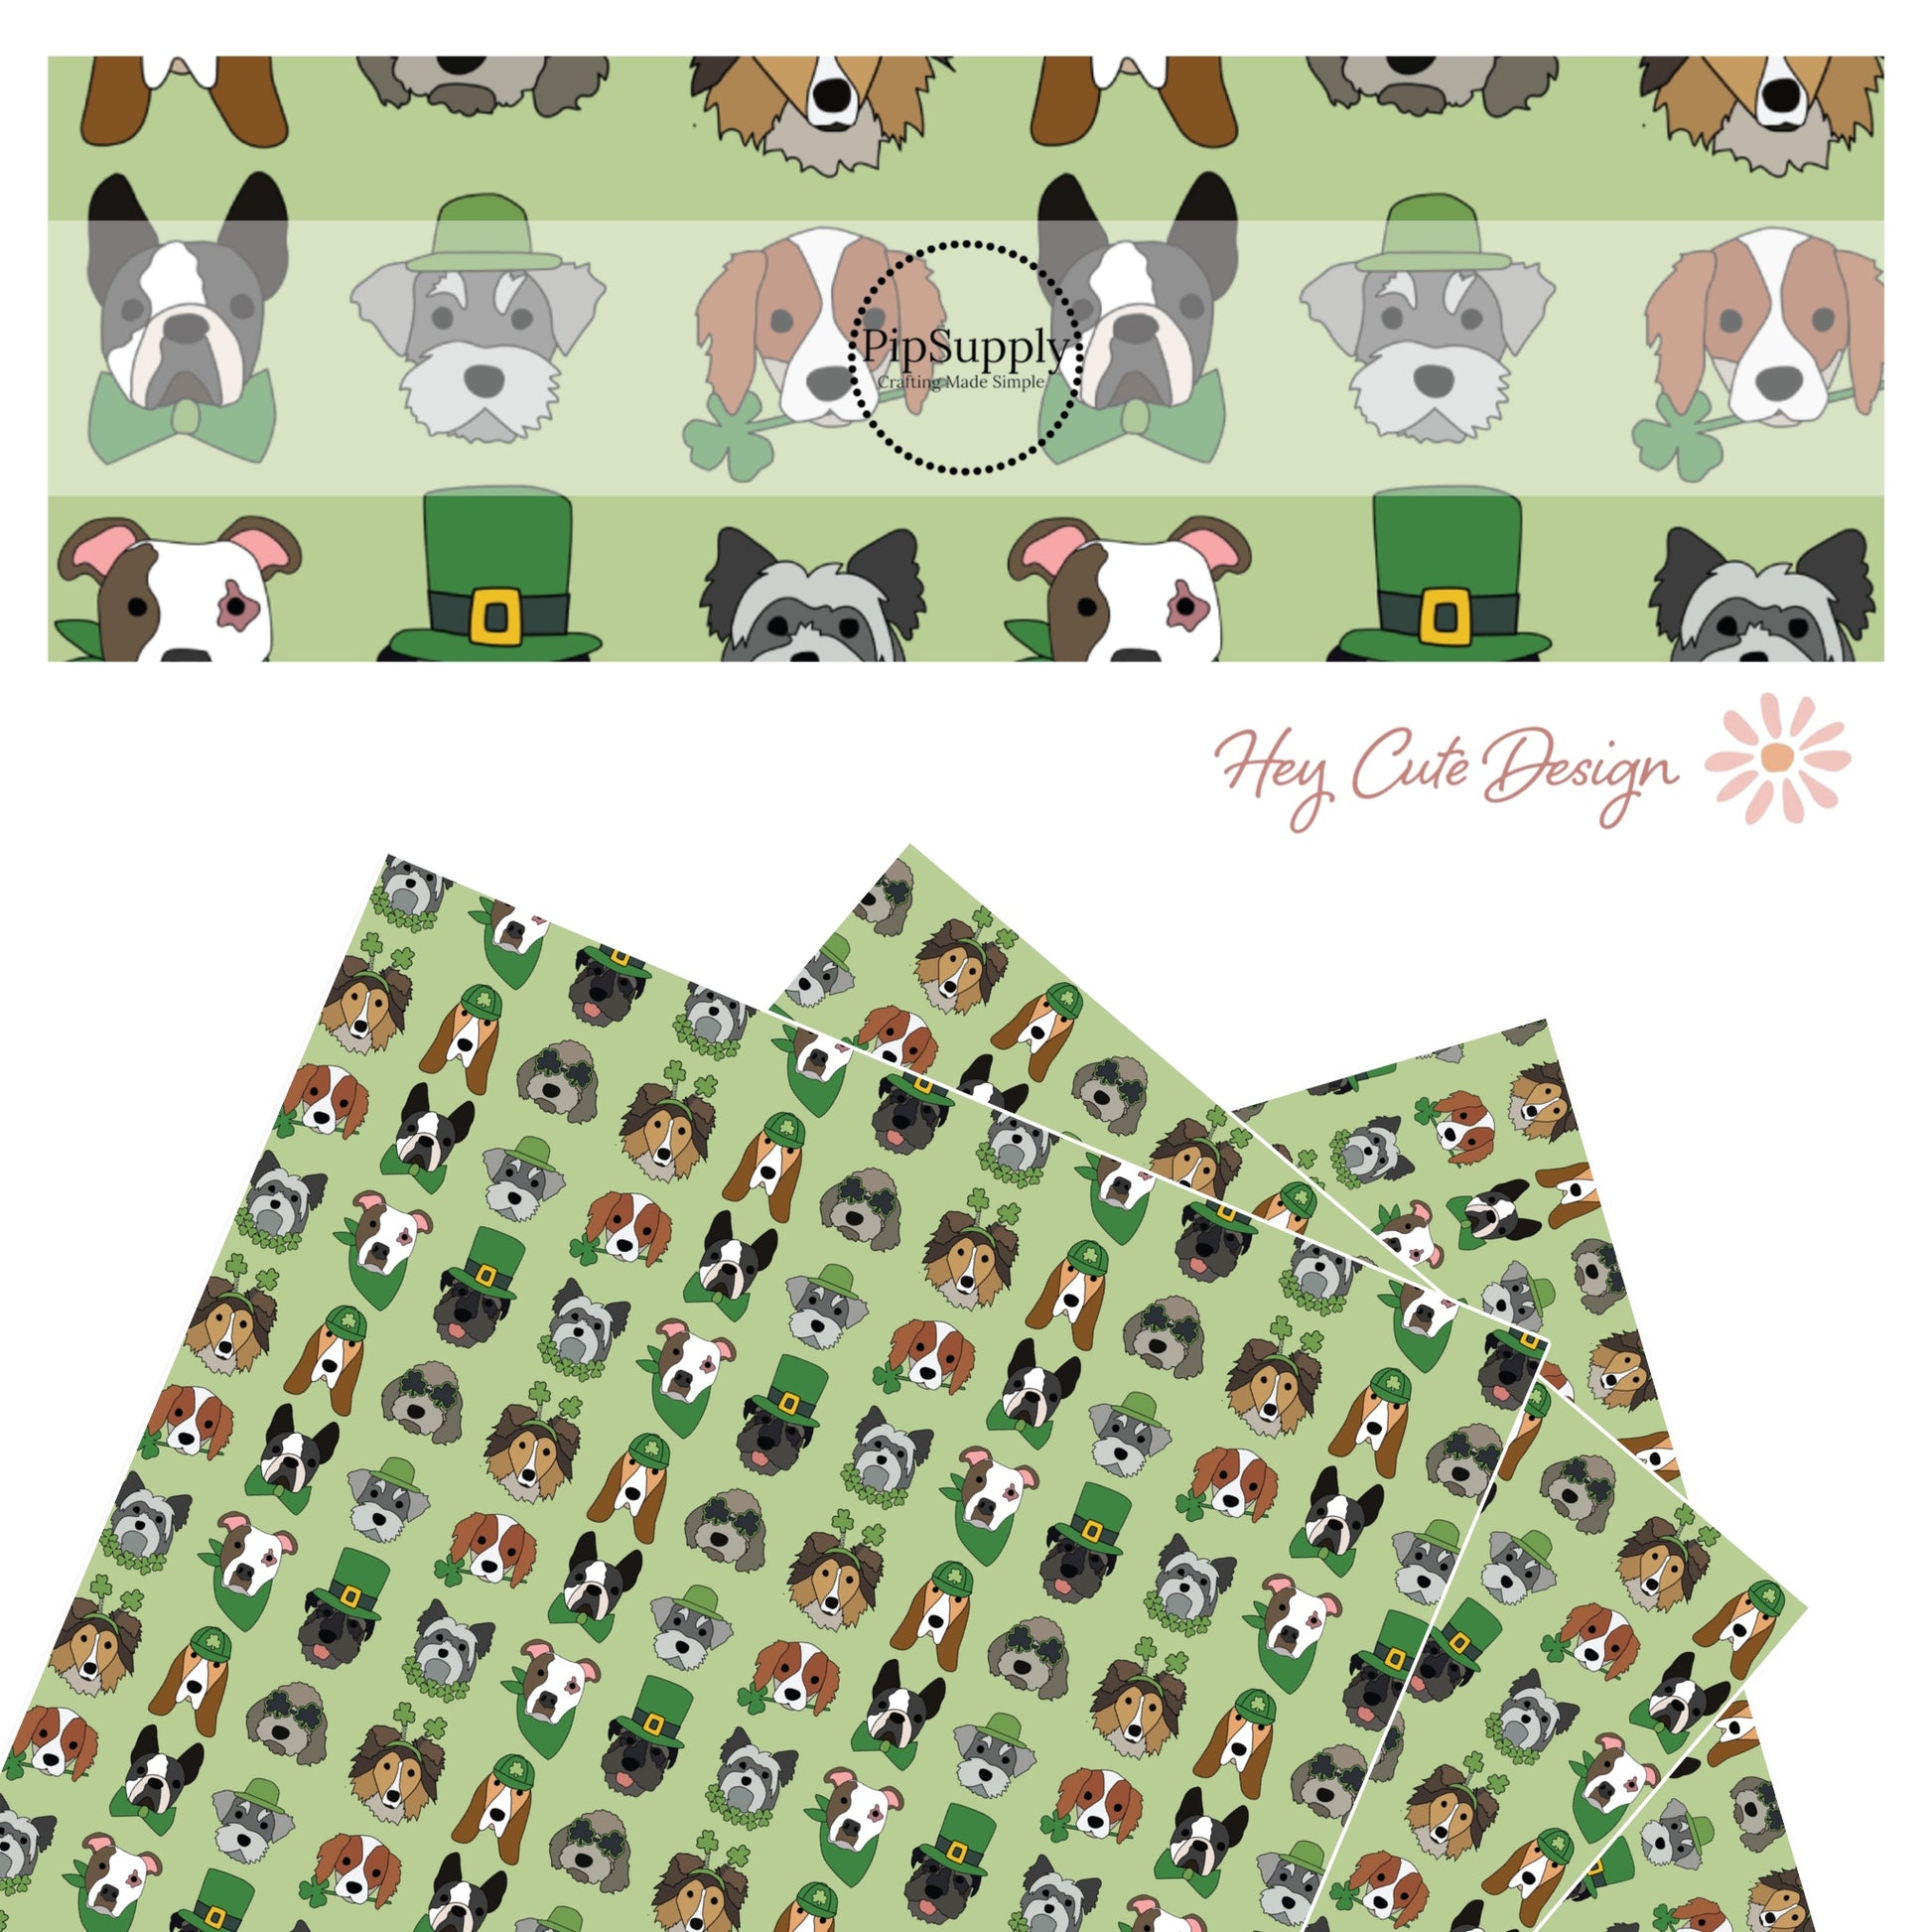 Gray, brown, and black puppies with green accents like a green bow tie, green hat, and a clover collar on a green faux leather sheet